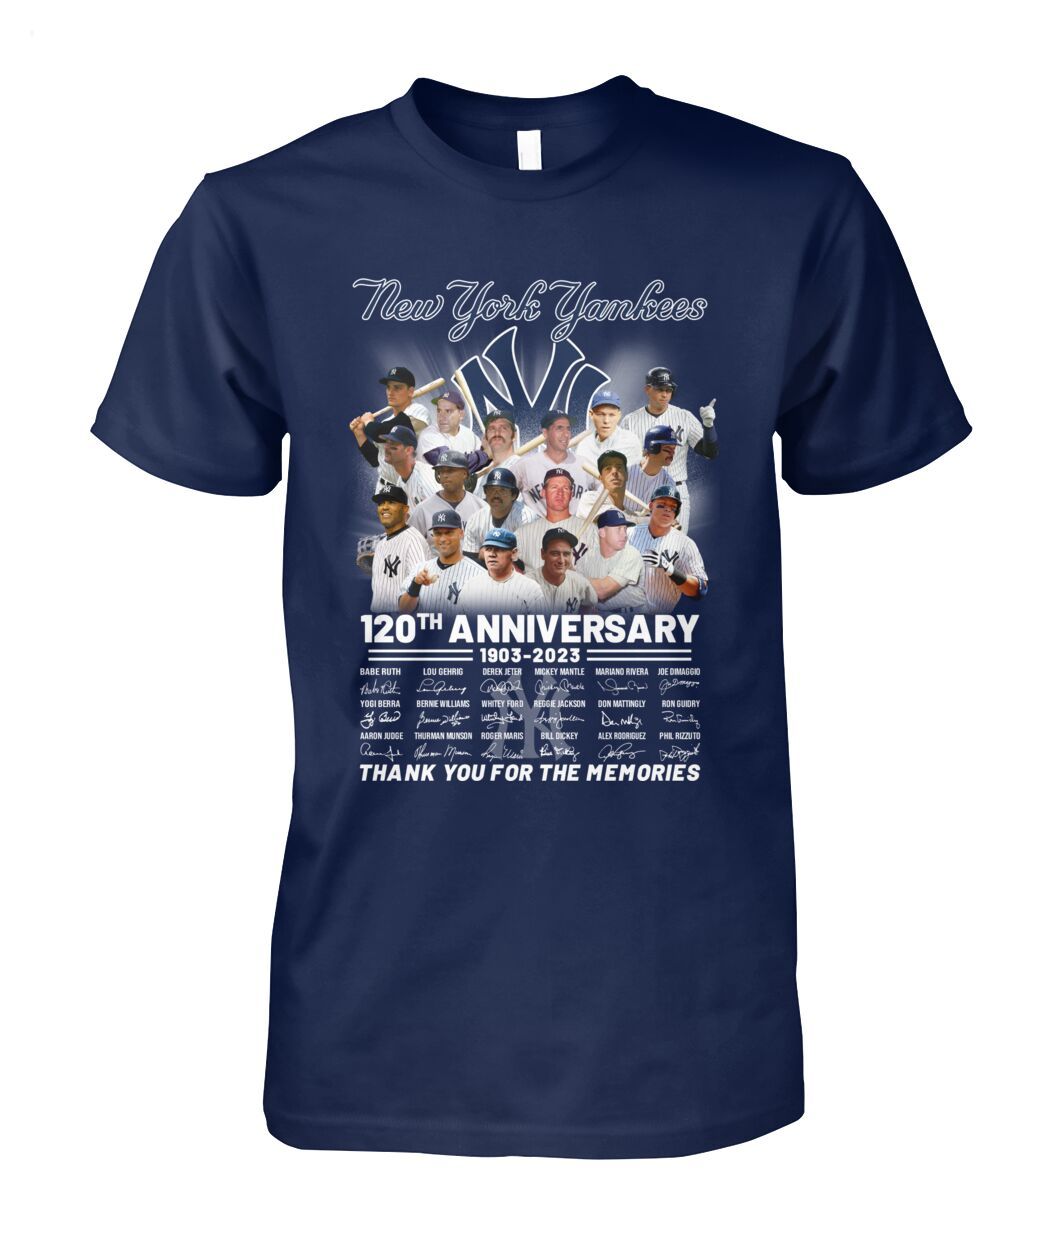 New York Yankees 120th Anniversary 1903 - 2023 Thank You For The